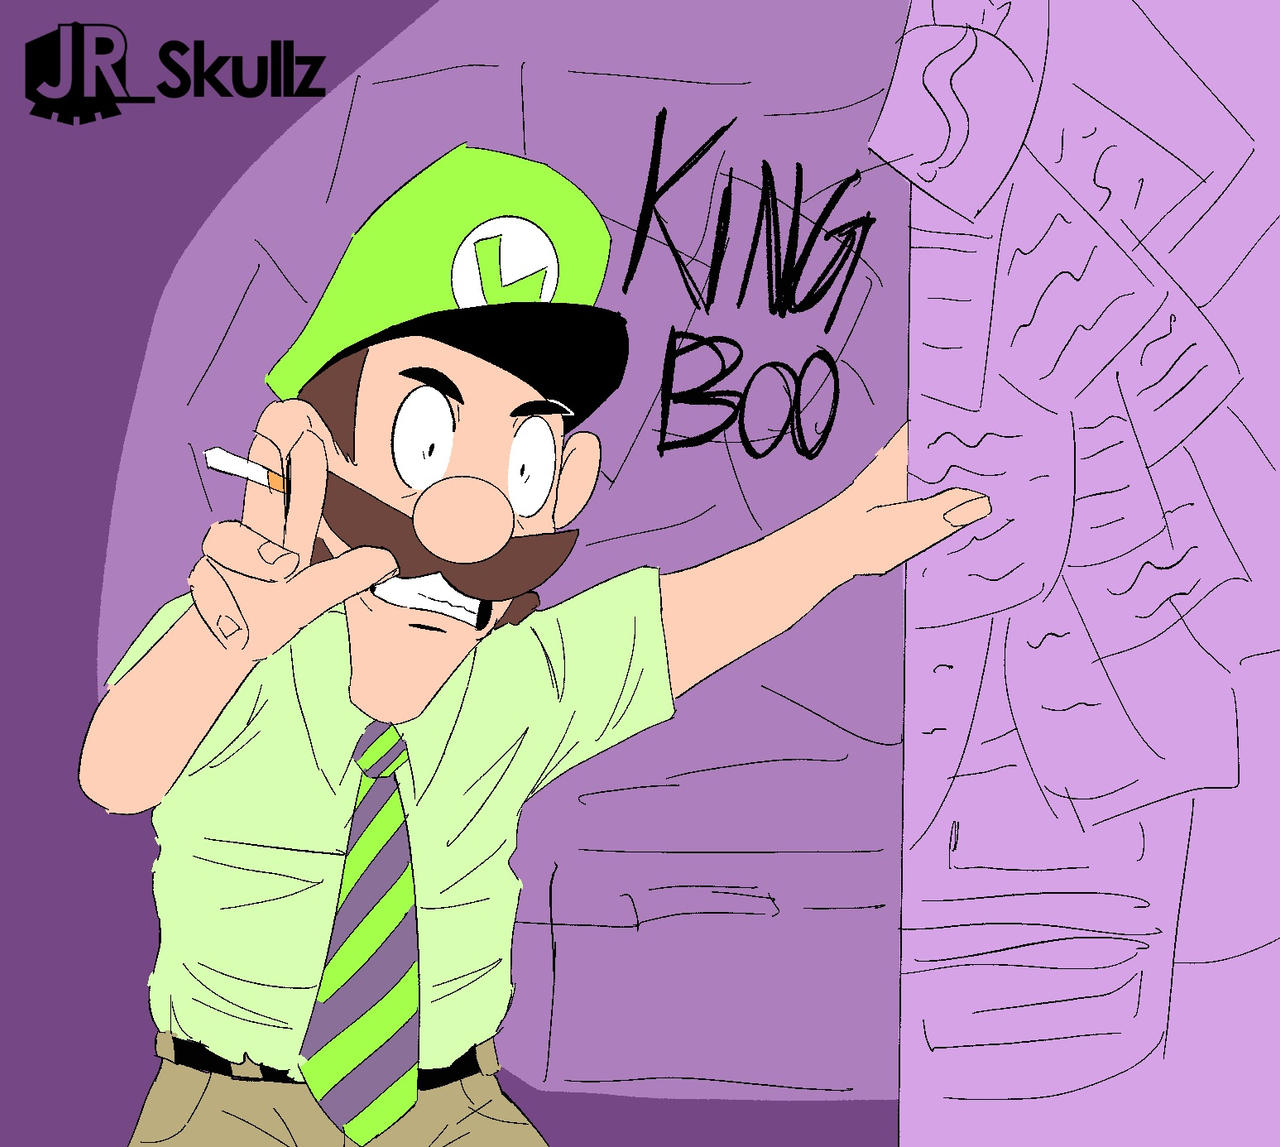 Charlie Day as Luigi by ExoticAqua on DeviantArt